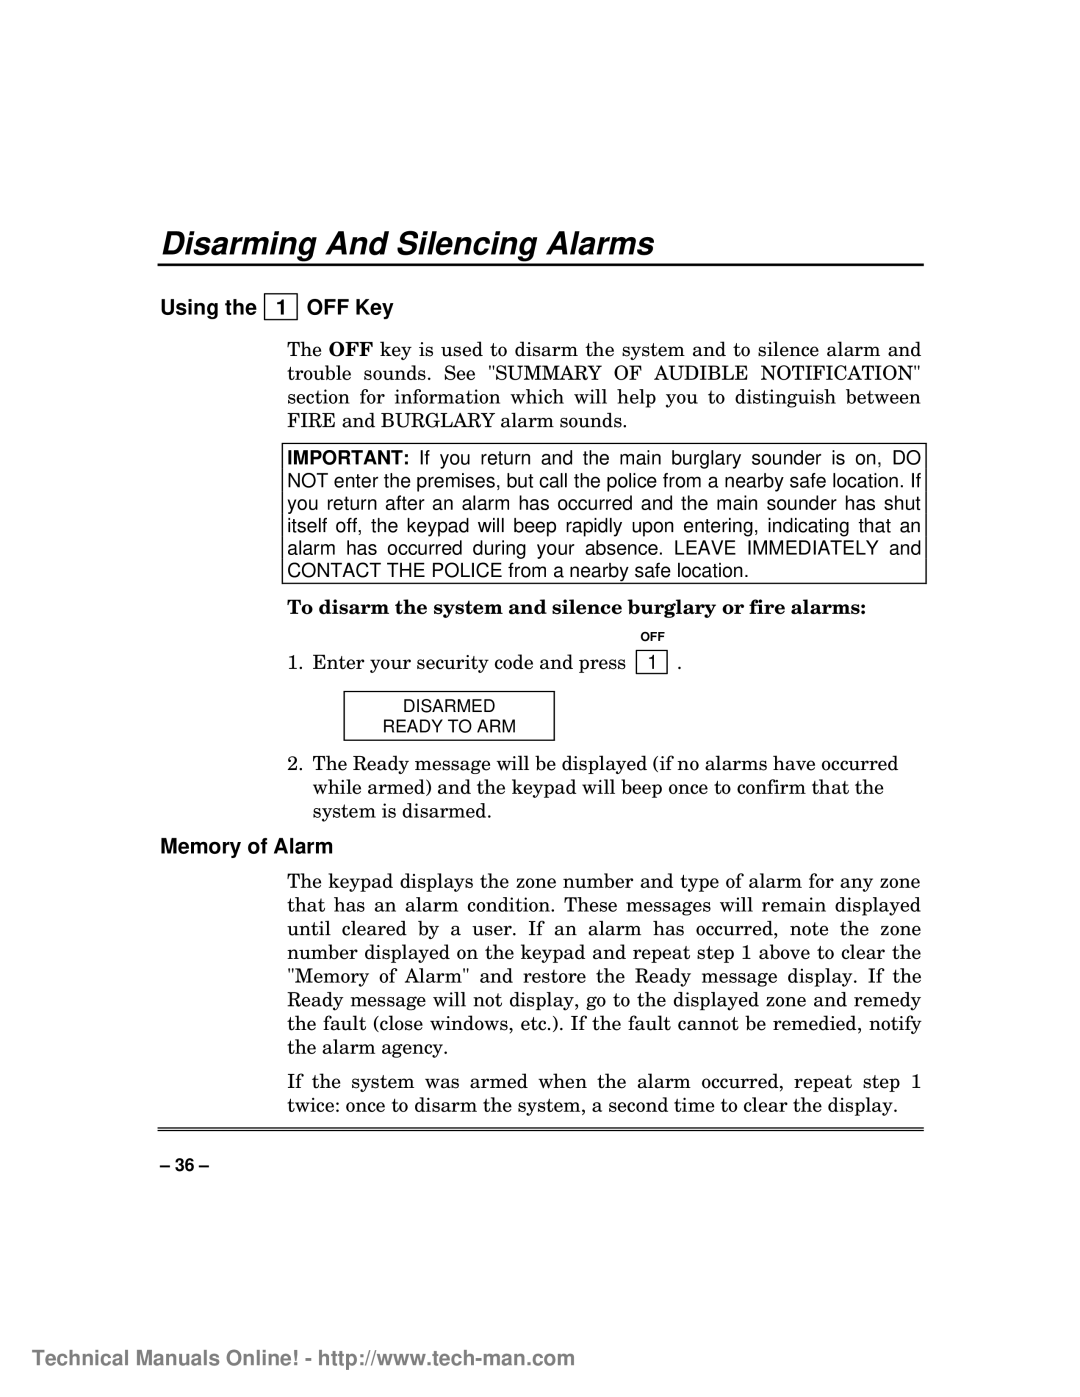 First Alert fa1600c, FA1600C/CA/CB technical manual Disarming And Silencing Alarms, Using the 1 OFF Key, Memory of Alarm 